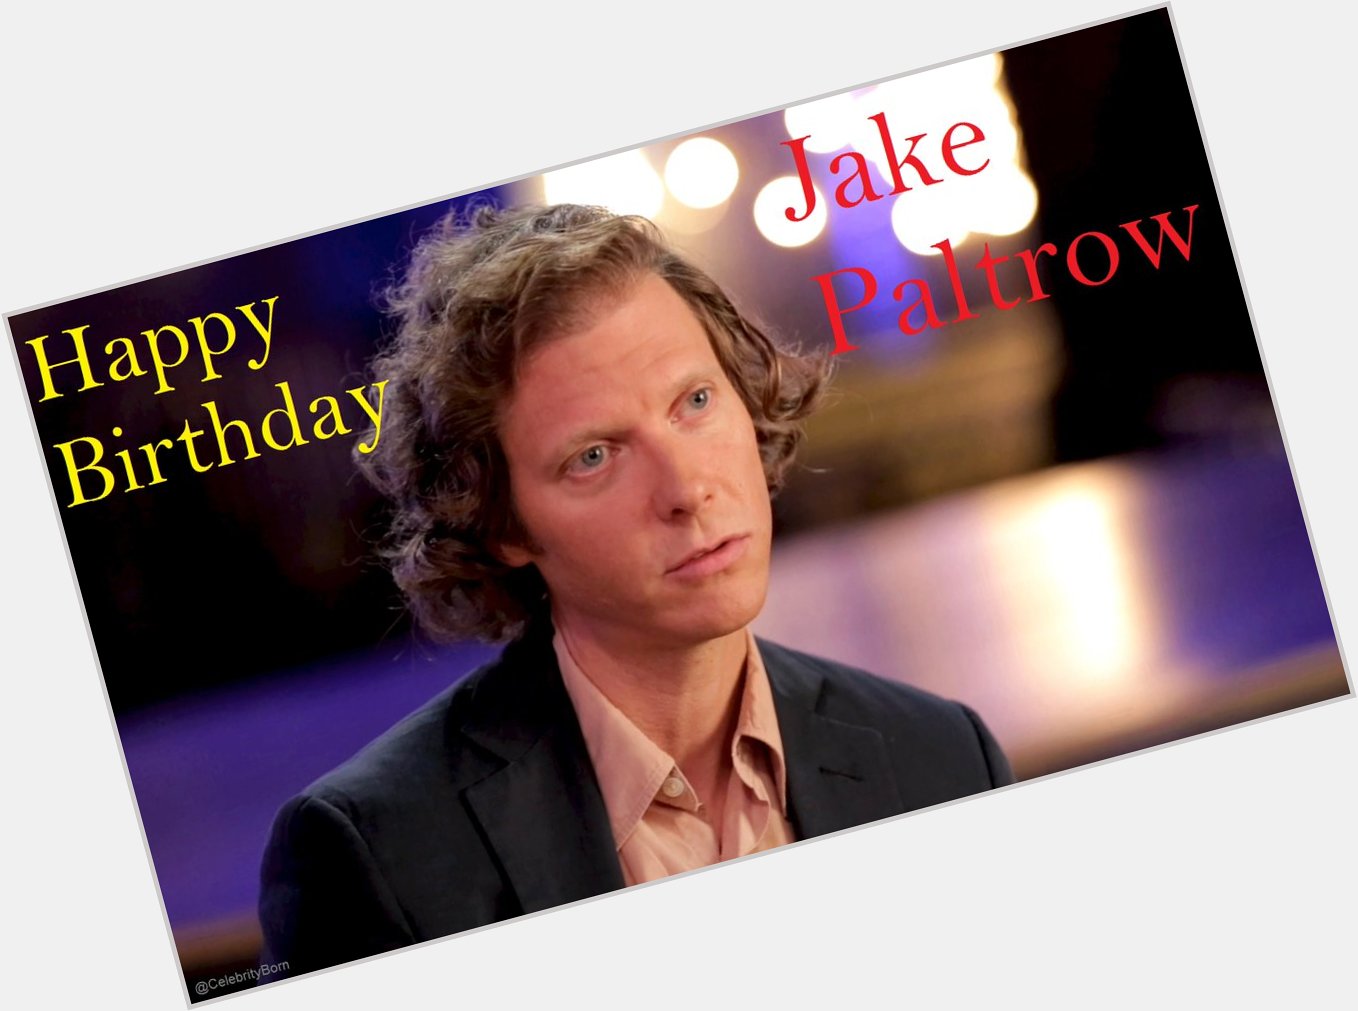 Happy Birthday to Jake Paltrow (American Film Director, Screenwriter, Television Director & Film Actor) 